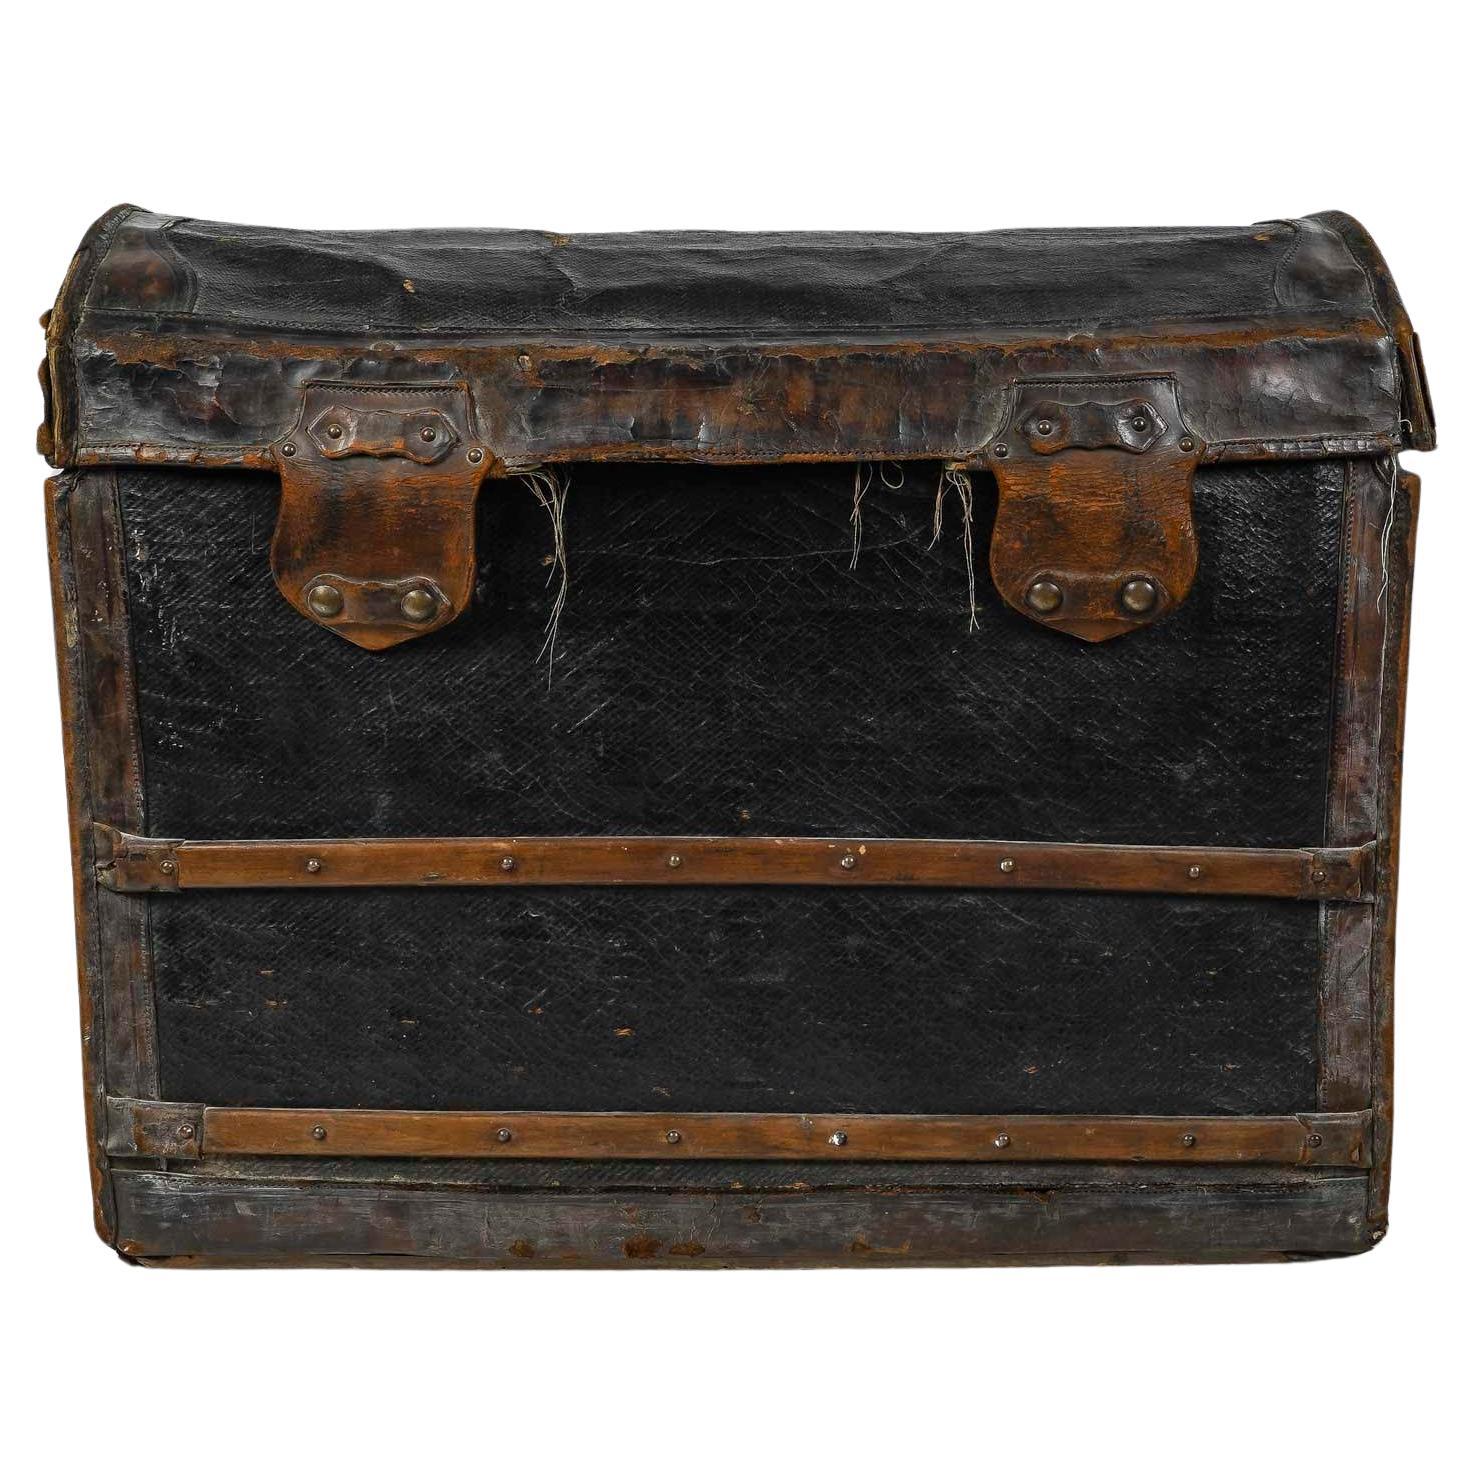 Large Travel Trunk, Antique Travel Trunk in Leather, Wood and Fabric, XIXth.